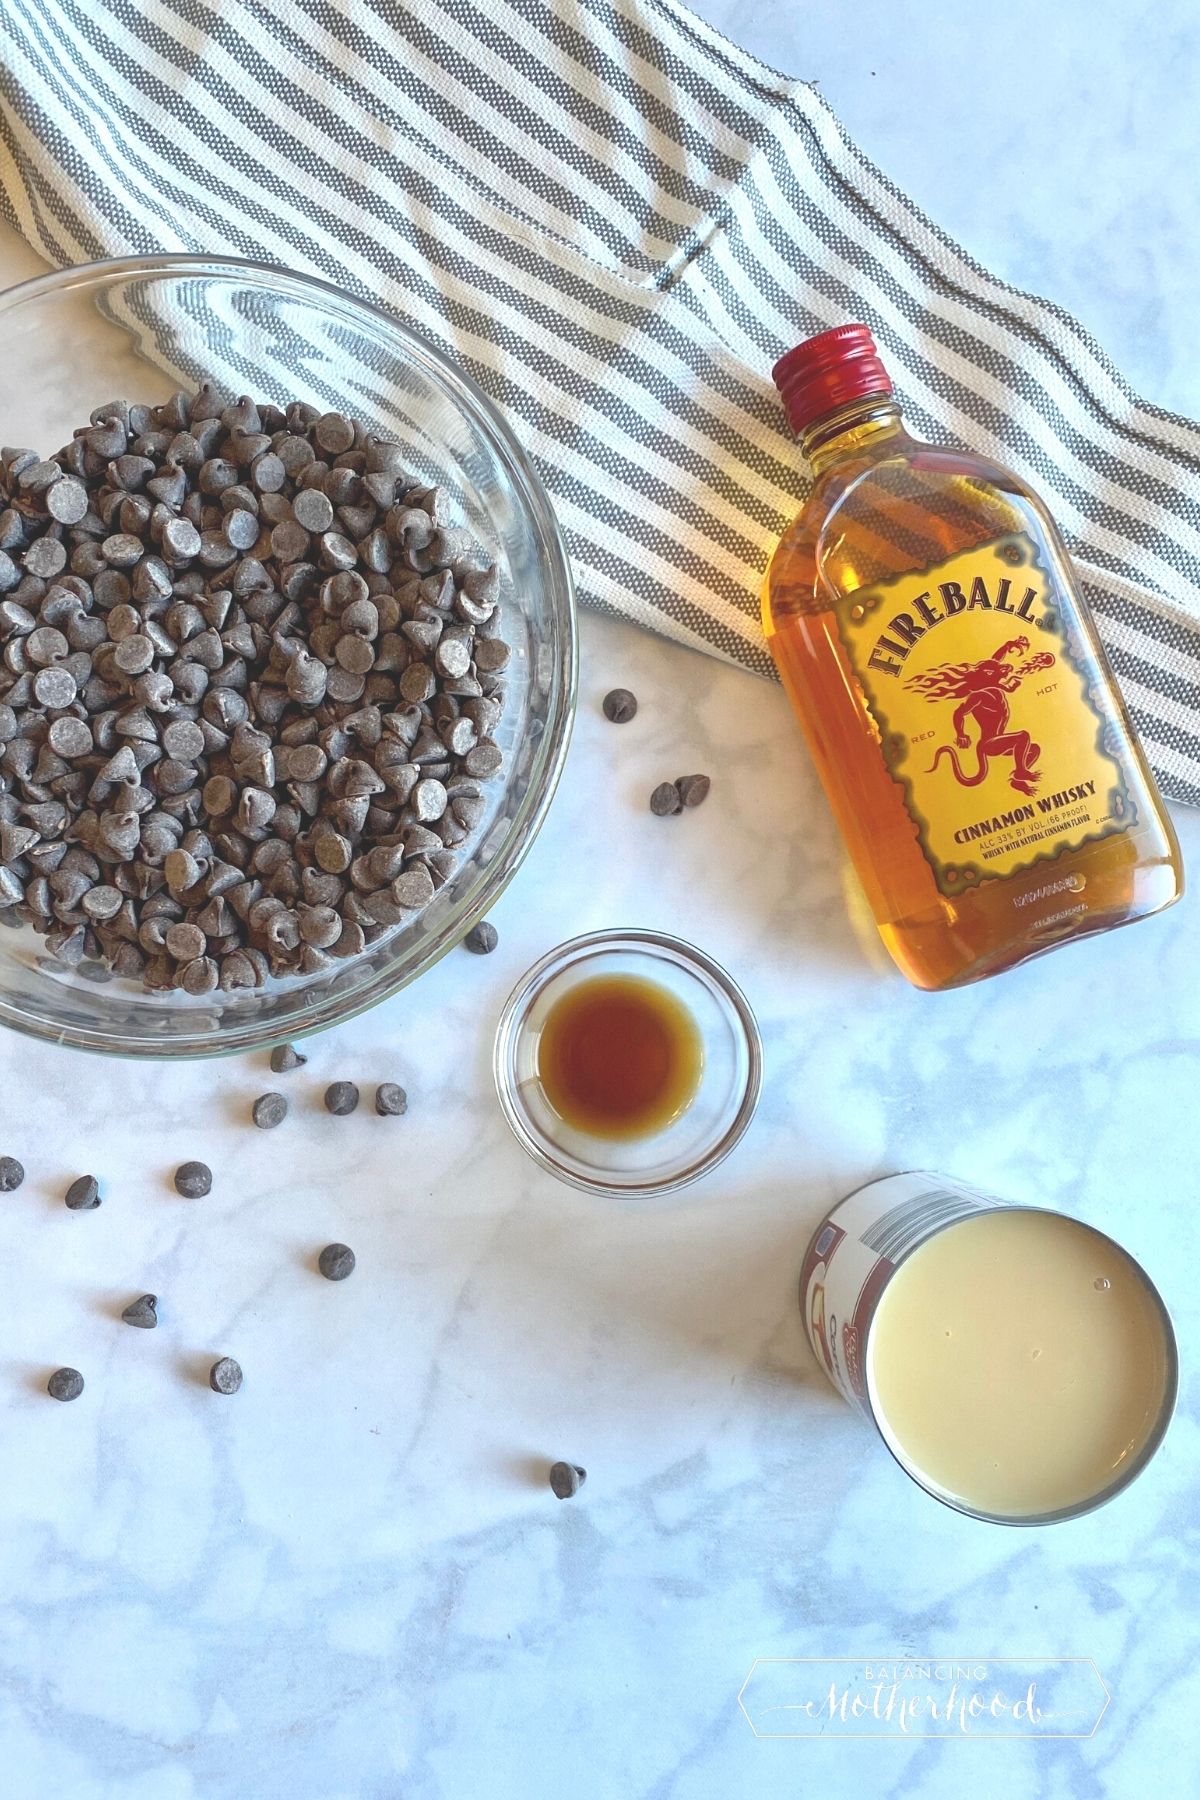 bottle of Fireball whisky, can of sweetened condensed milk (opened), chocolate chips, and vanilla extract on white counter